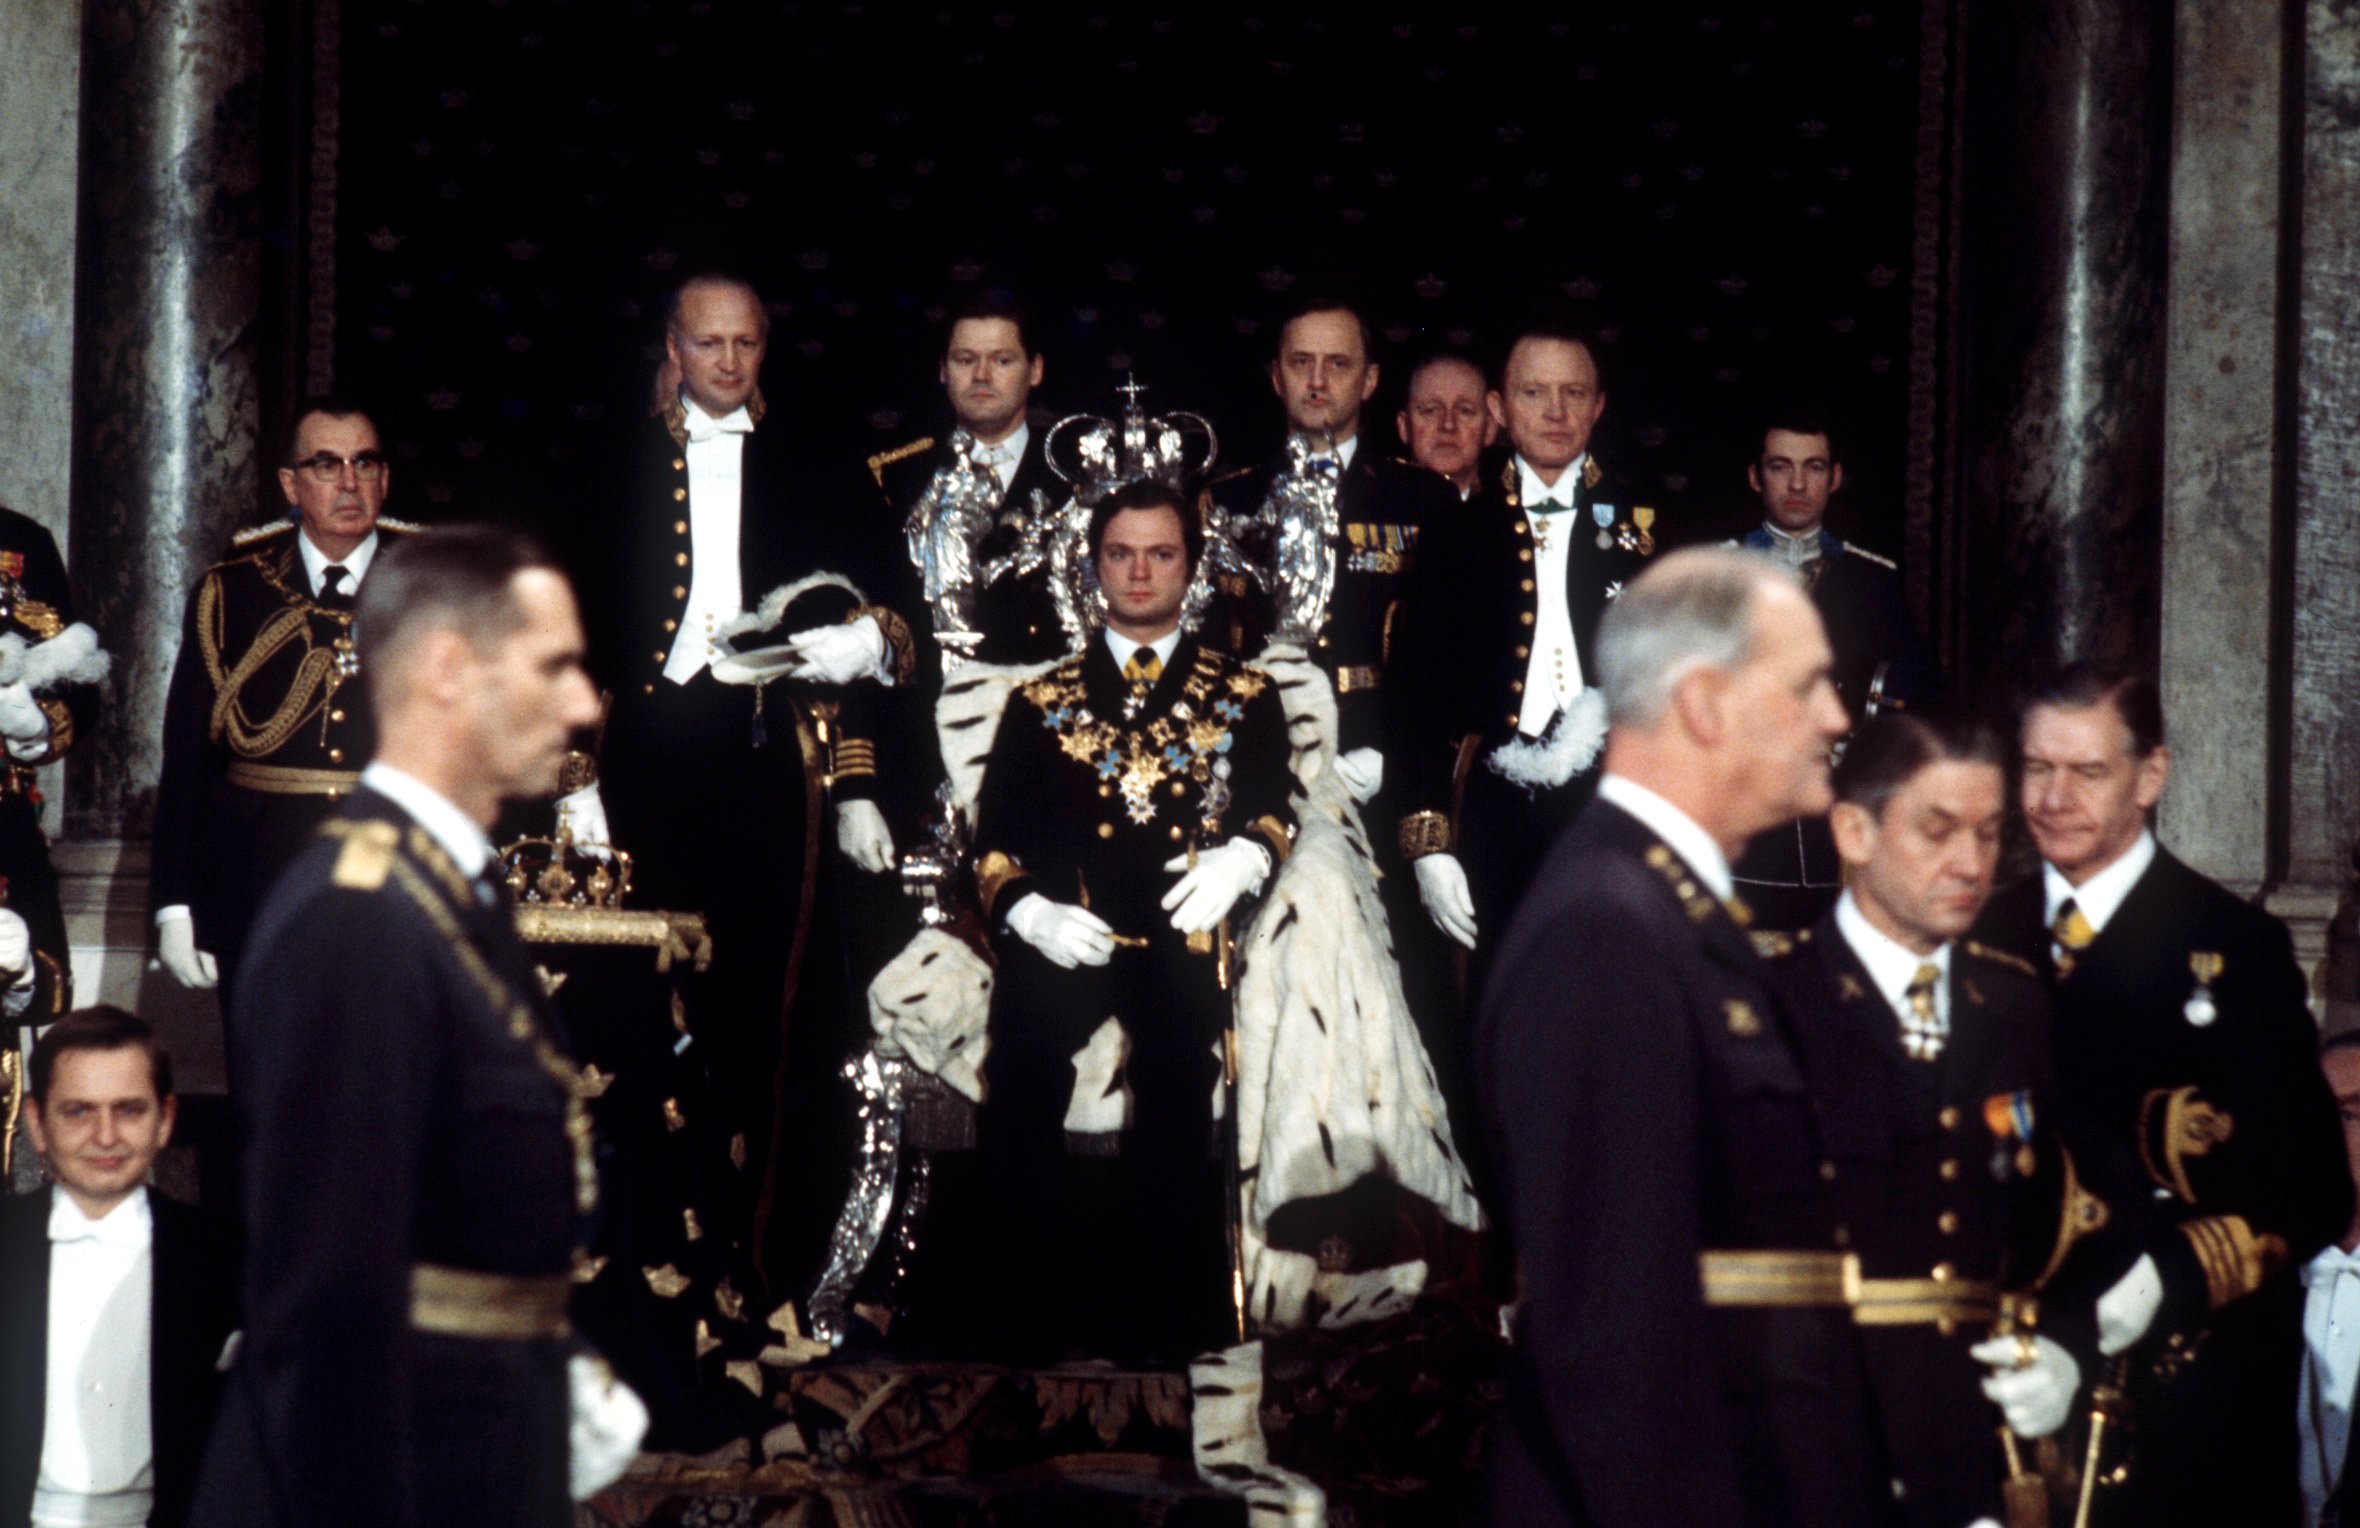 The last time the coronation mantle was used for ceremonial purposes was during the ceremonial Opening of the Parliamentary Session in 1974, when it was draped over the silver throne. 